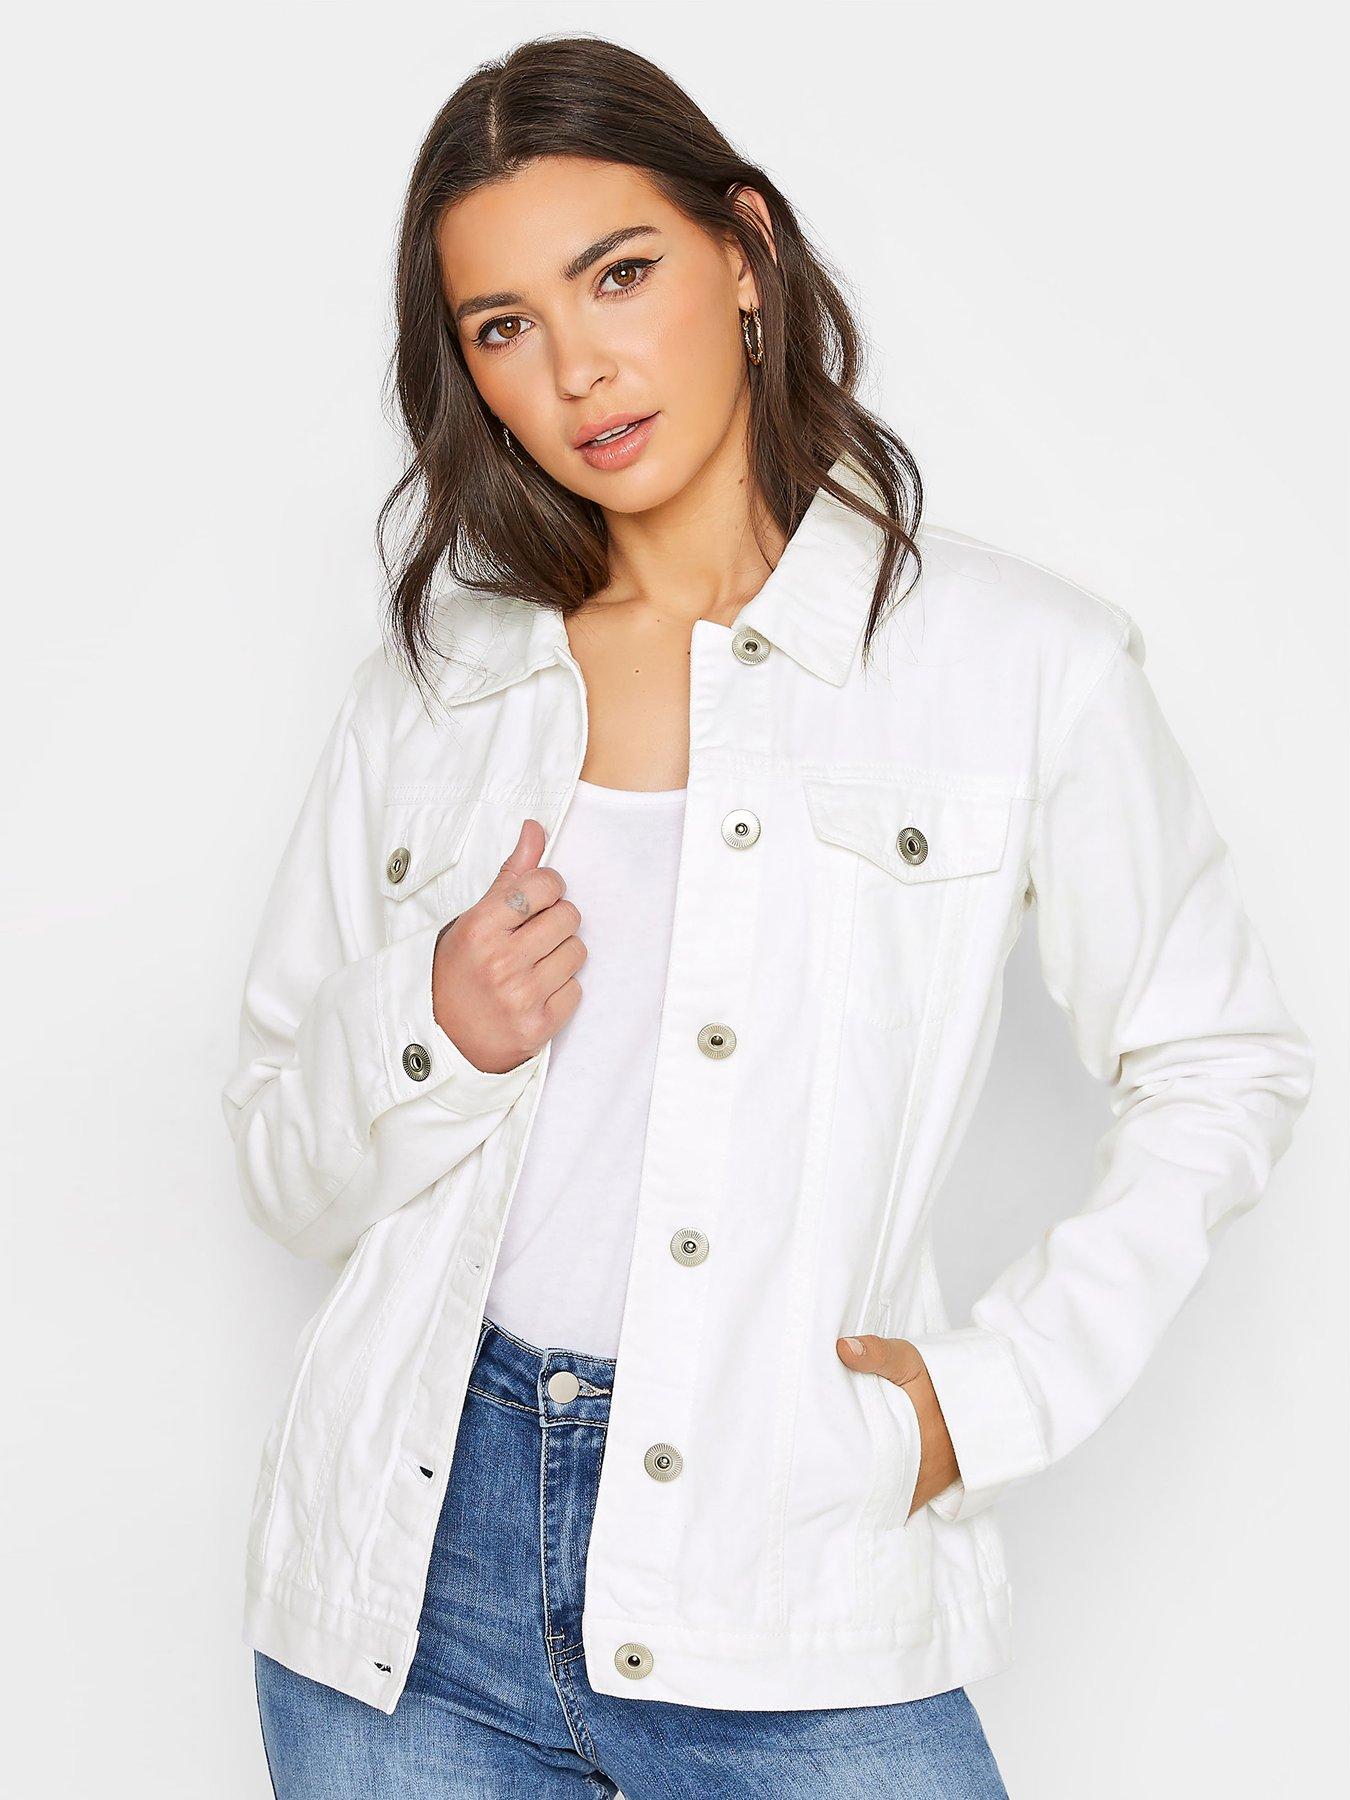 Reformation Smith Denim Jacket in White Womens Clothing Jackets Jean and denim jackets 